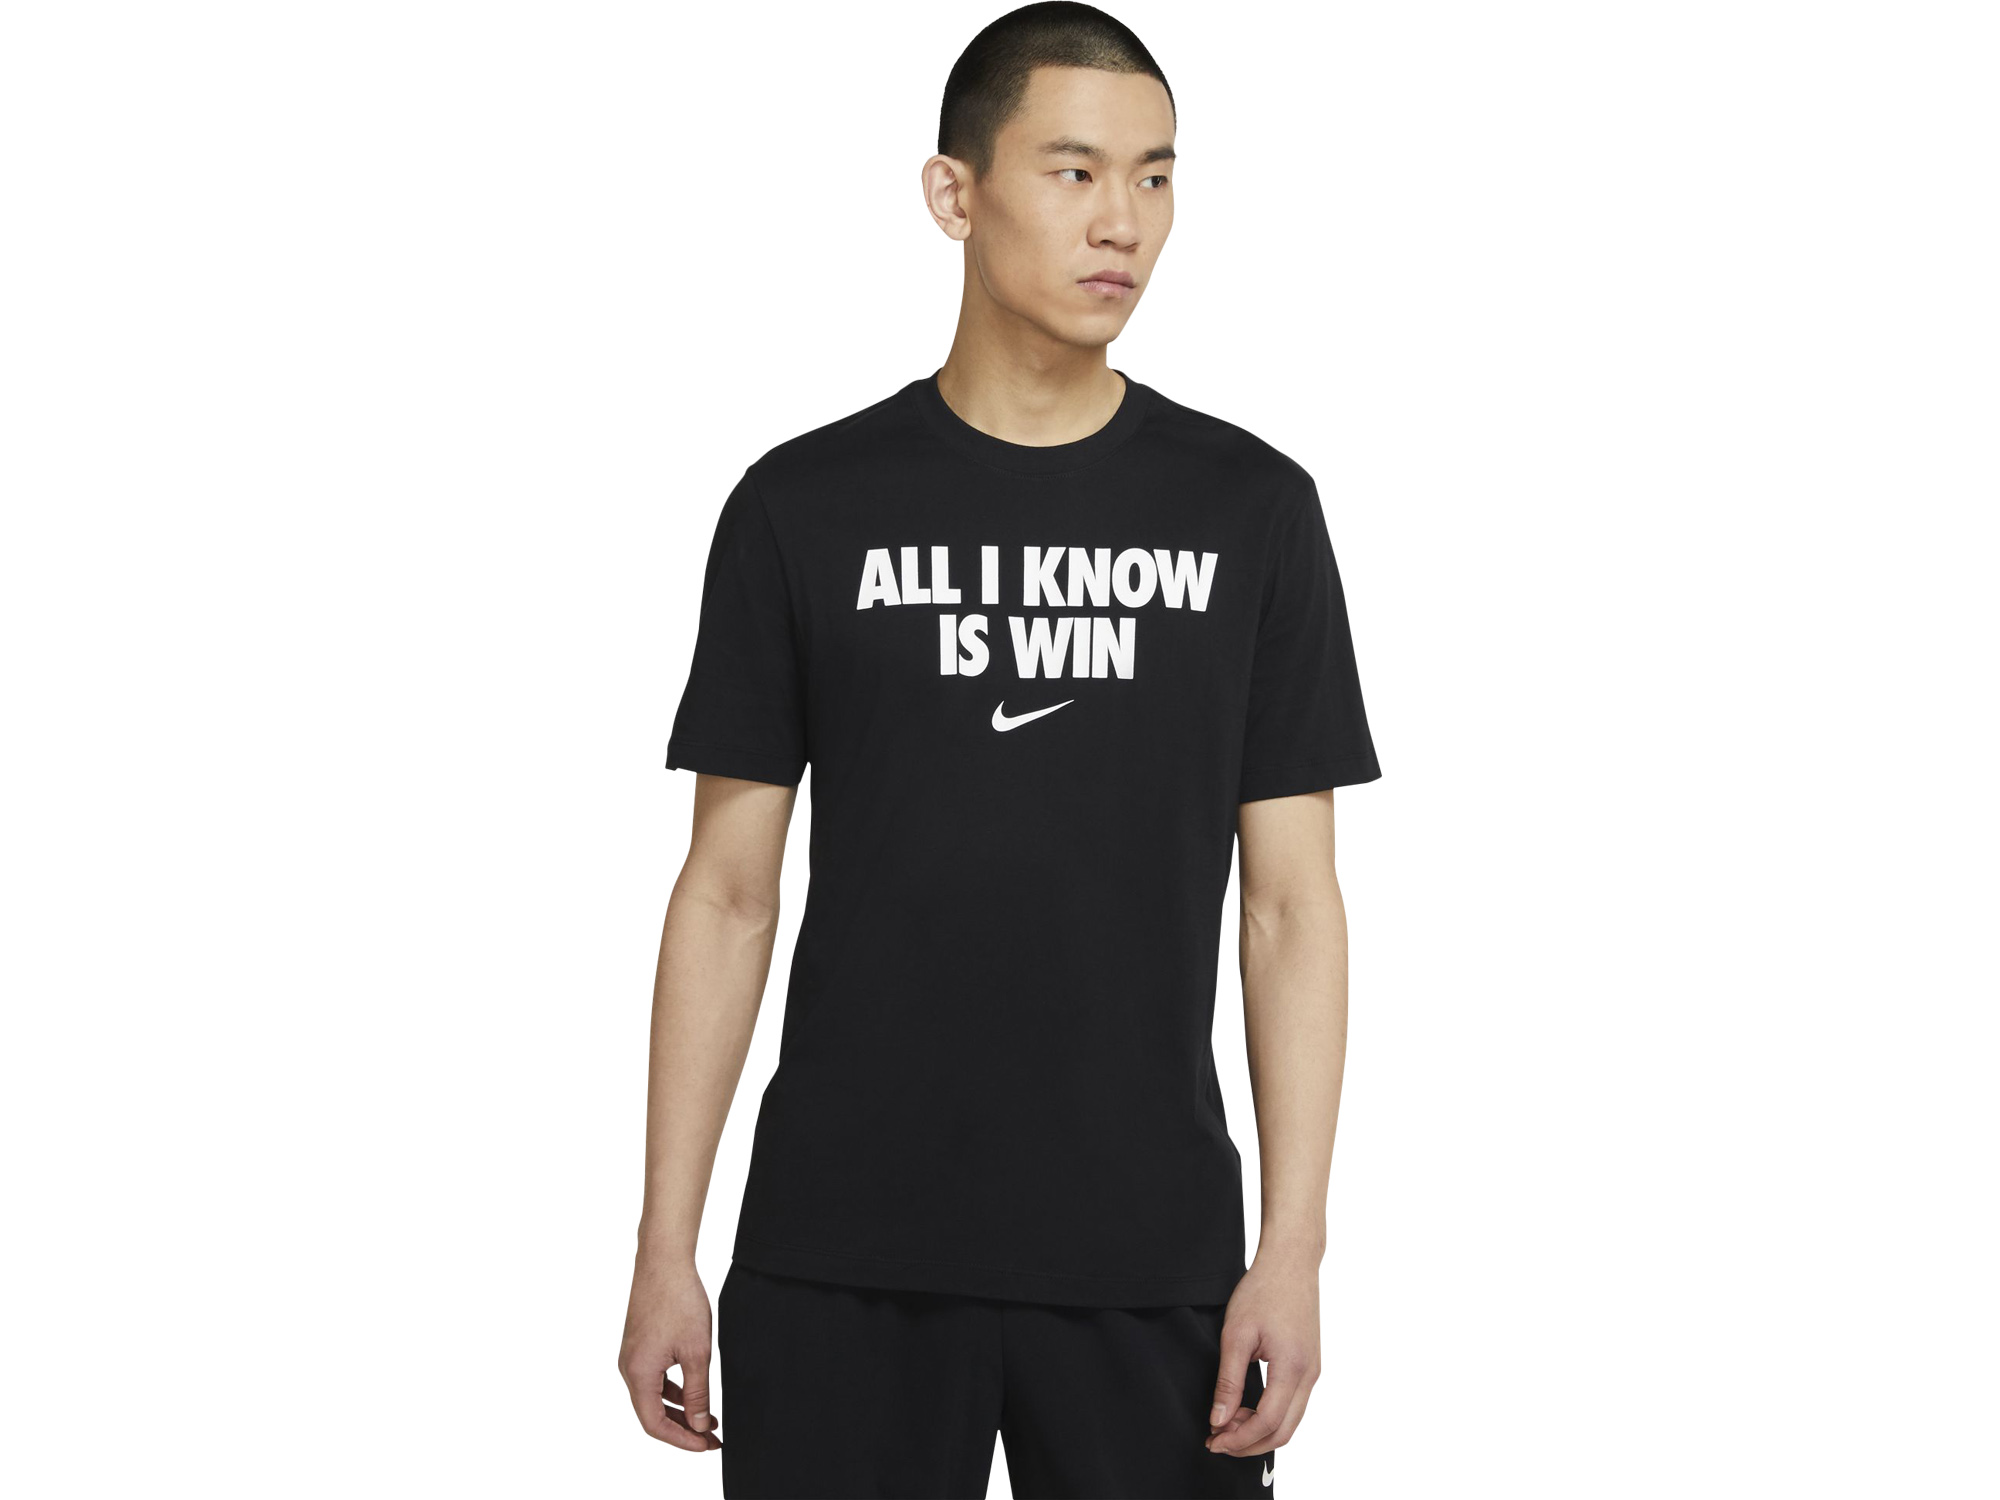 Nike "All I Know Is Win" T-Shirt